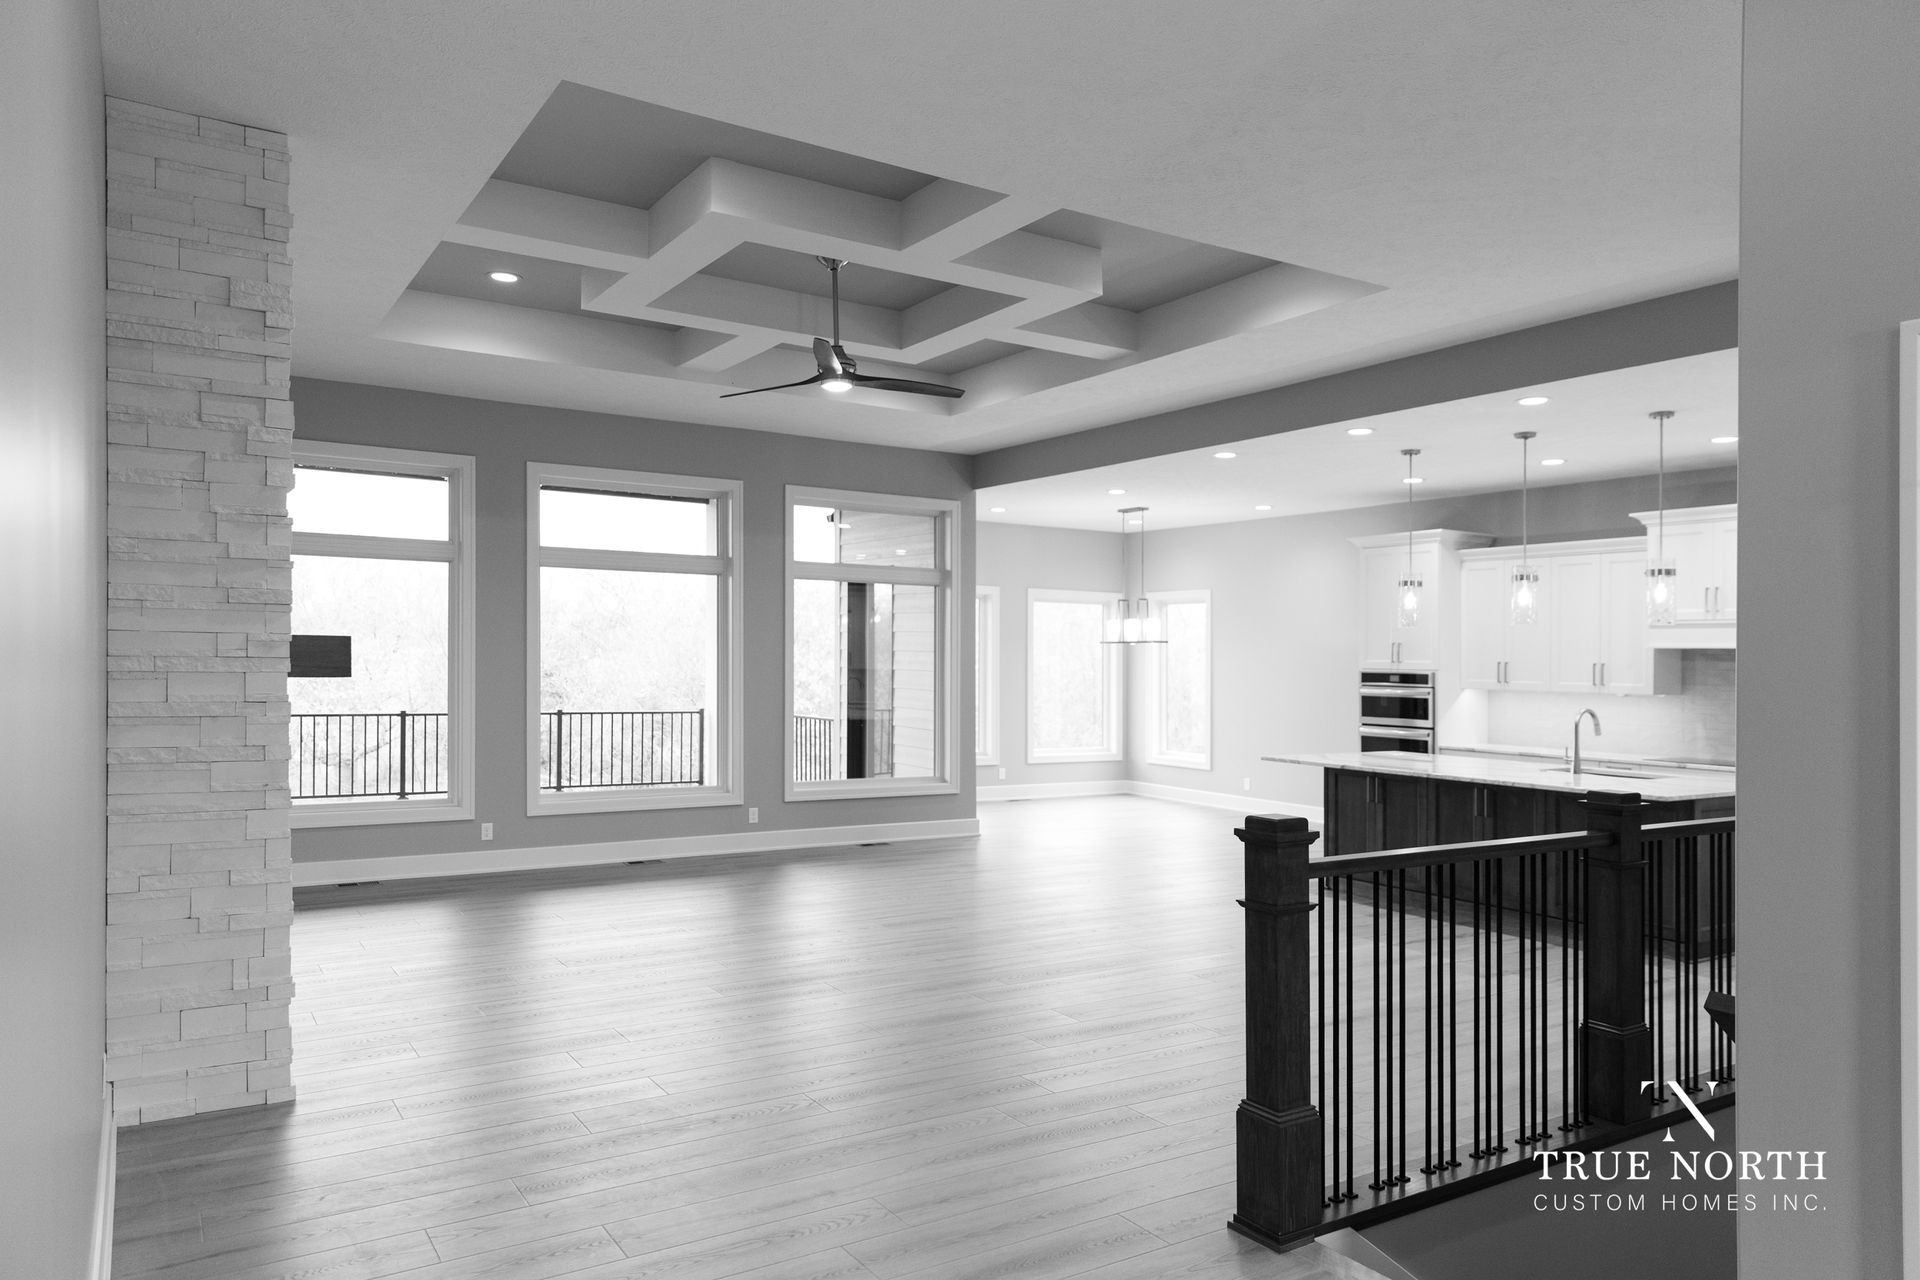 Spacious living space created by True North Custom Homes.